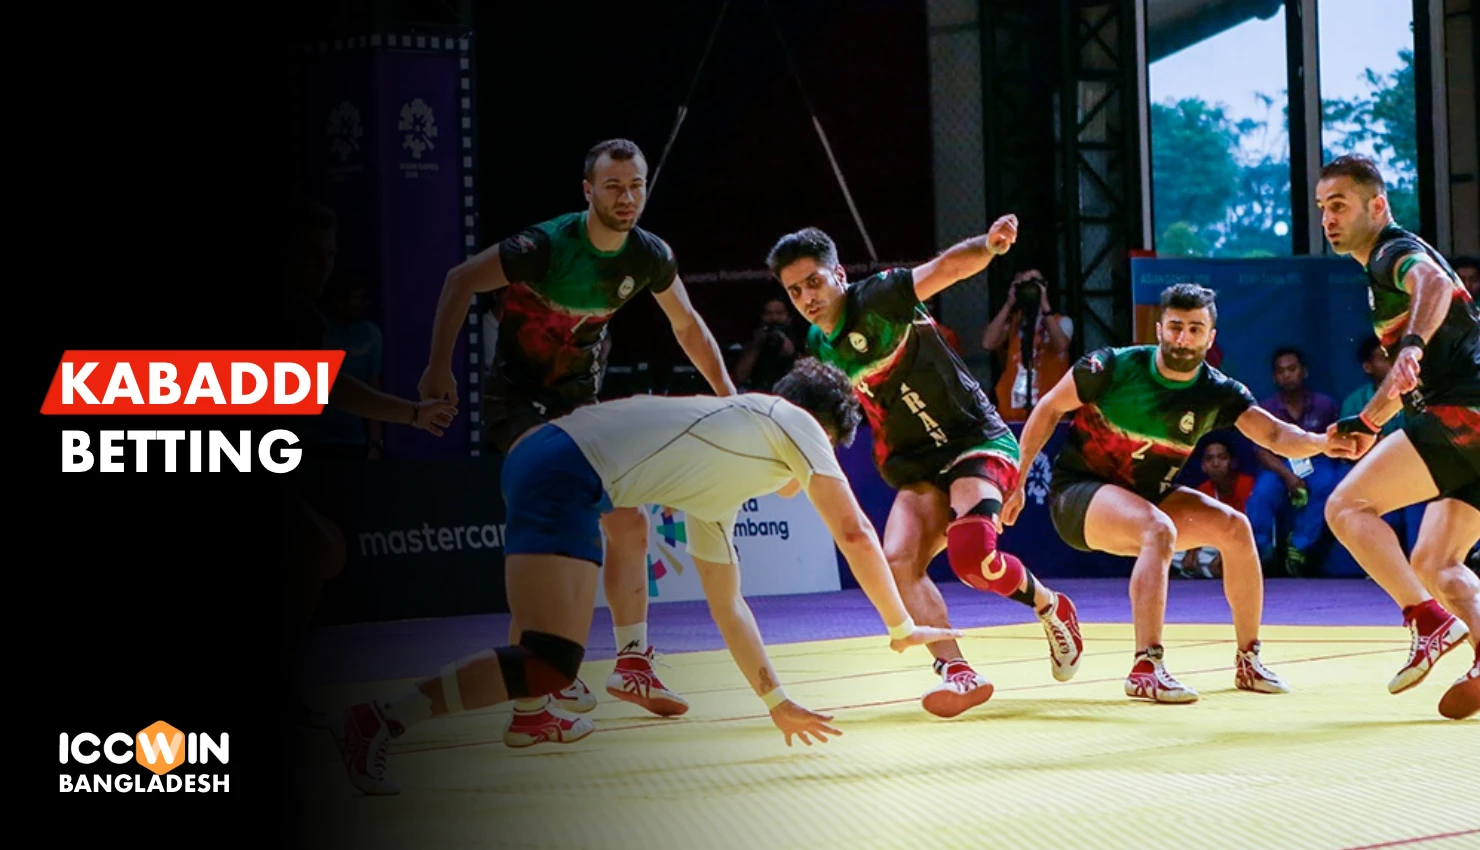 Iccwin users from Bangladesh can bet on Kabaddi using the official website or mobile app